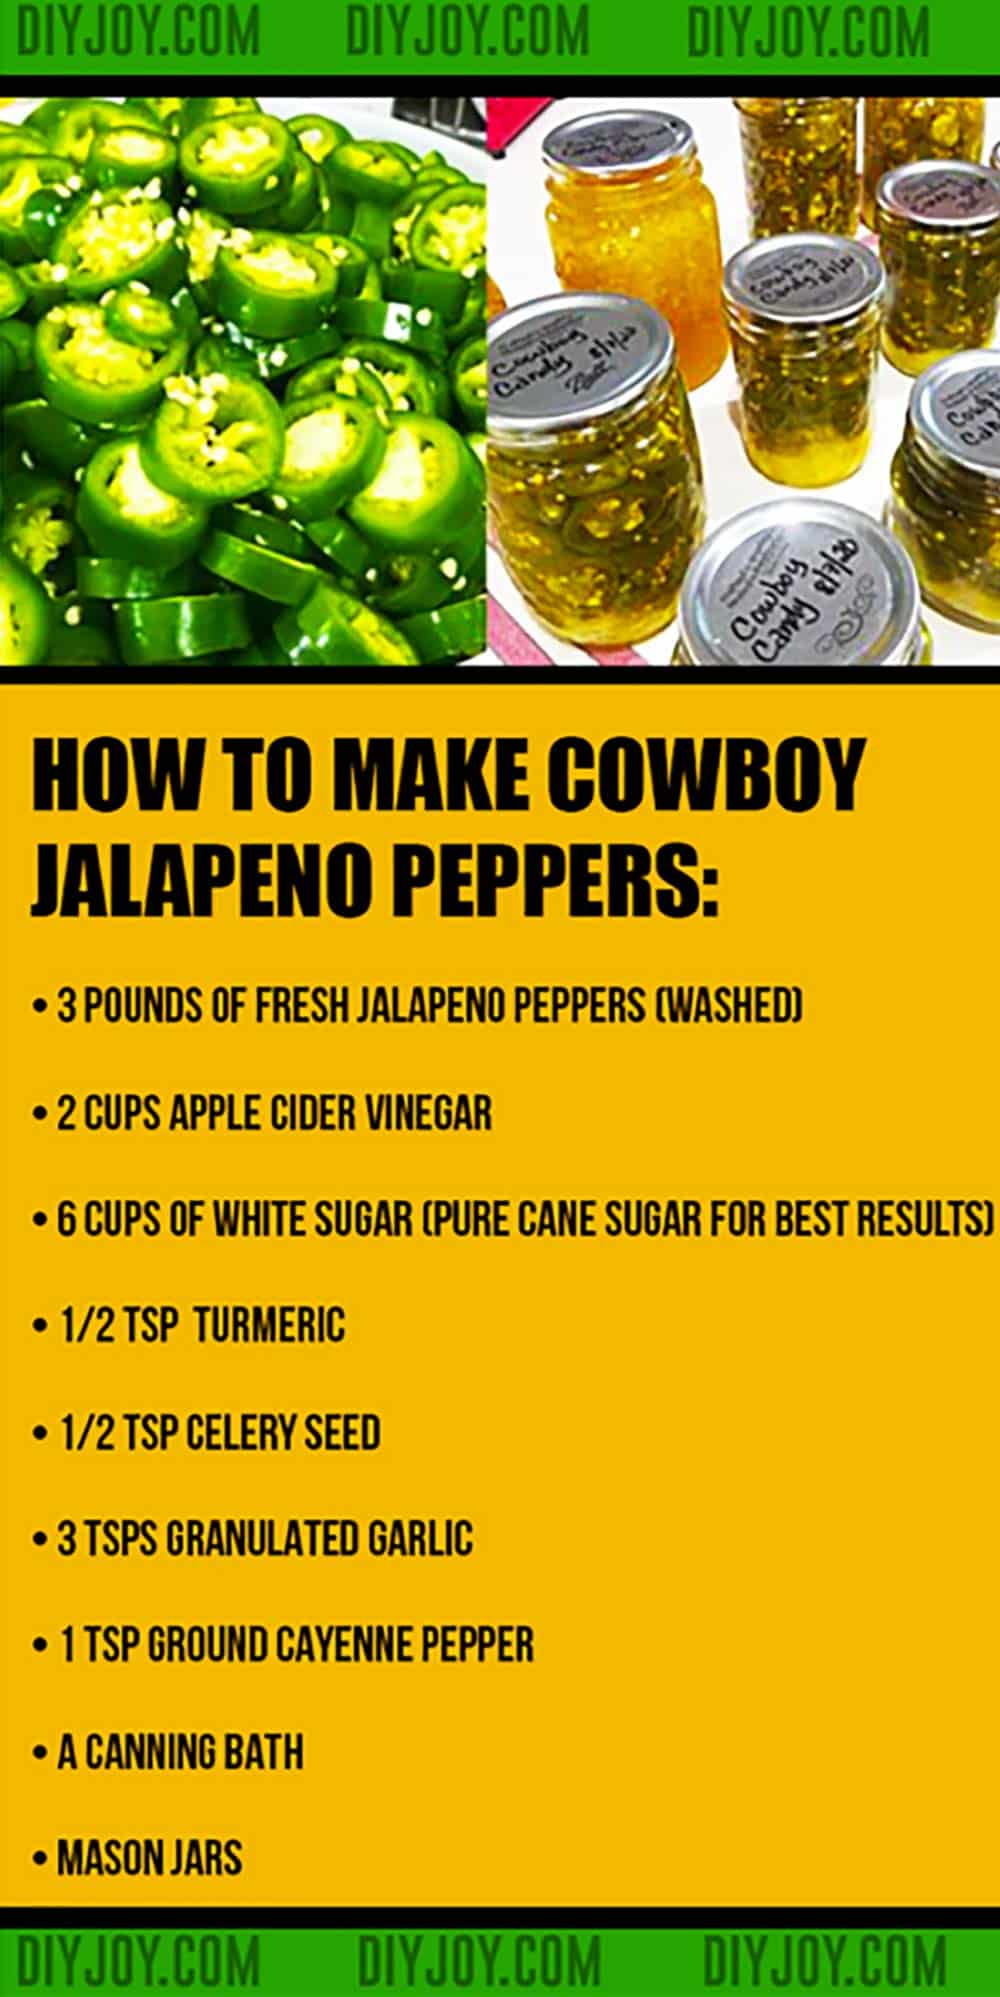 Easy Canning ideas for Jalapenos - How to Make Candy Jalapeno Poppers Recipe - Southern and Country Style Cooking Ideas